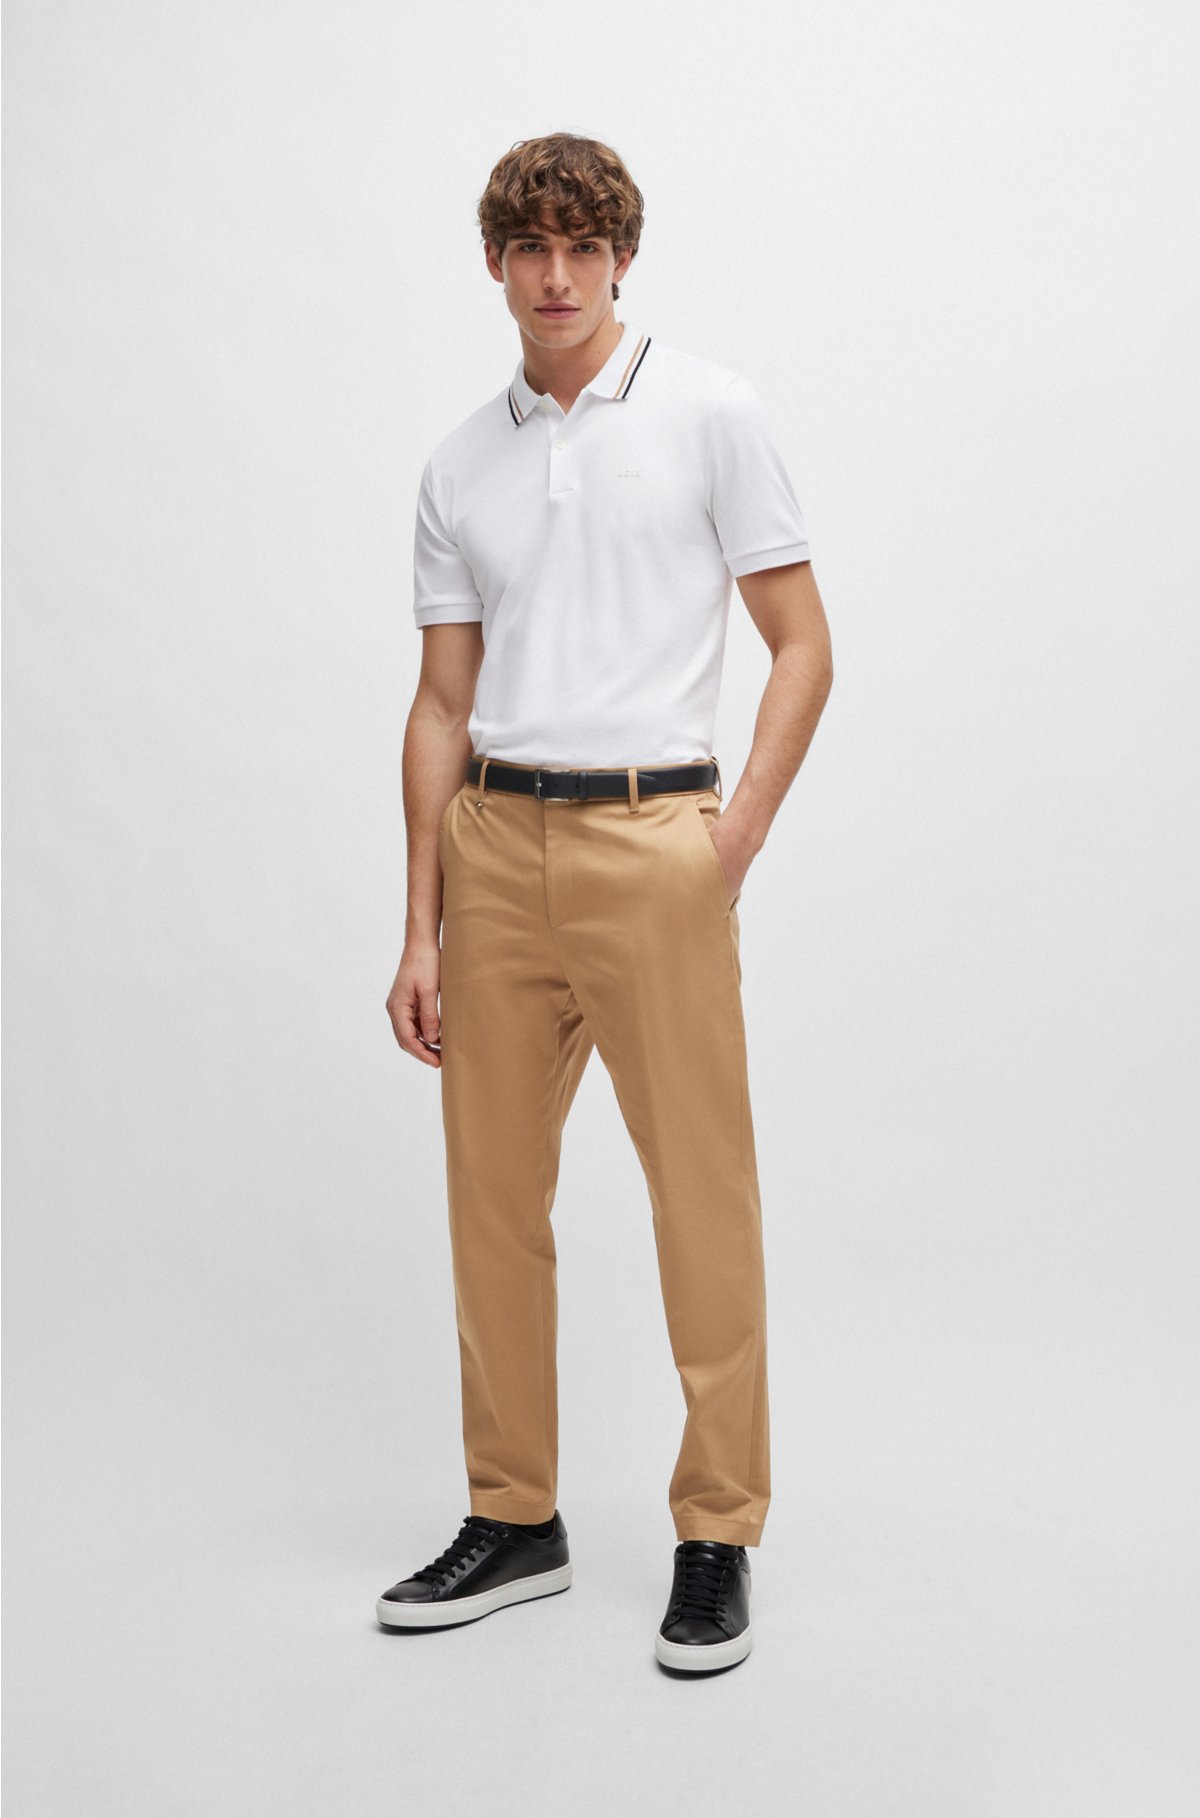 A New Day Brown Tan Dress Pants Size 6 (Tall) - 57% off